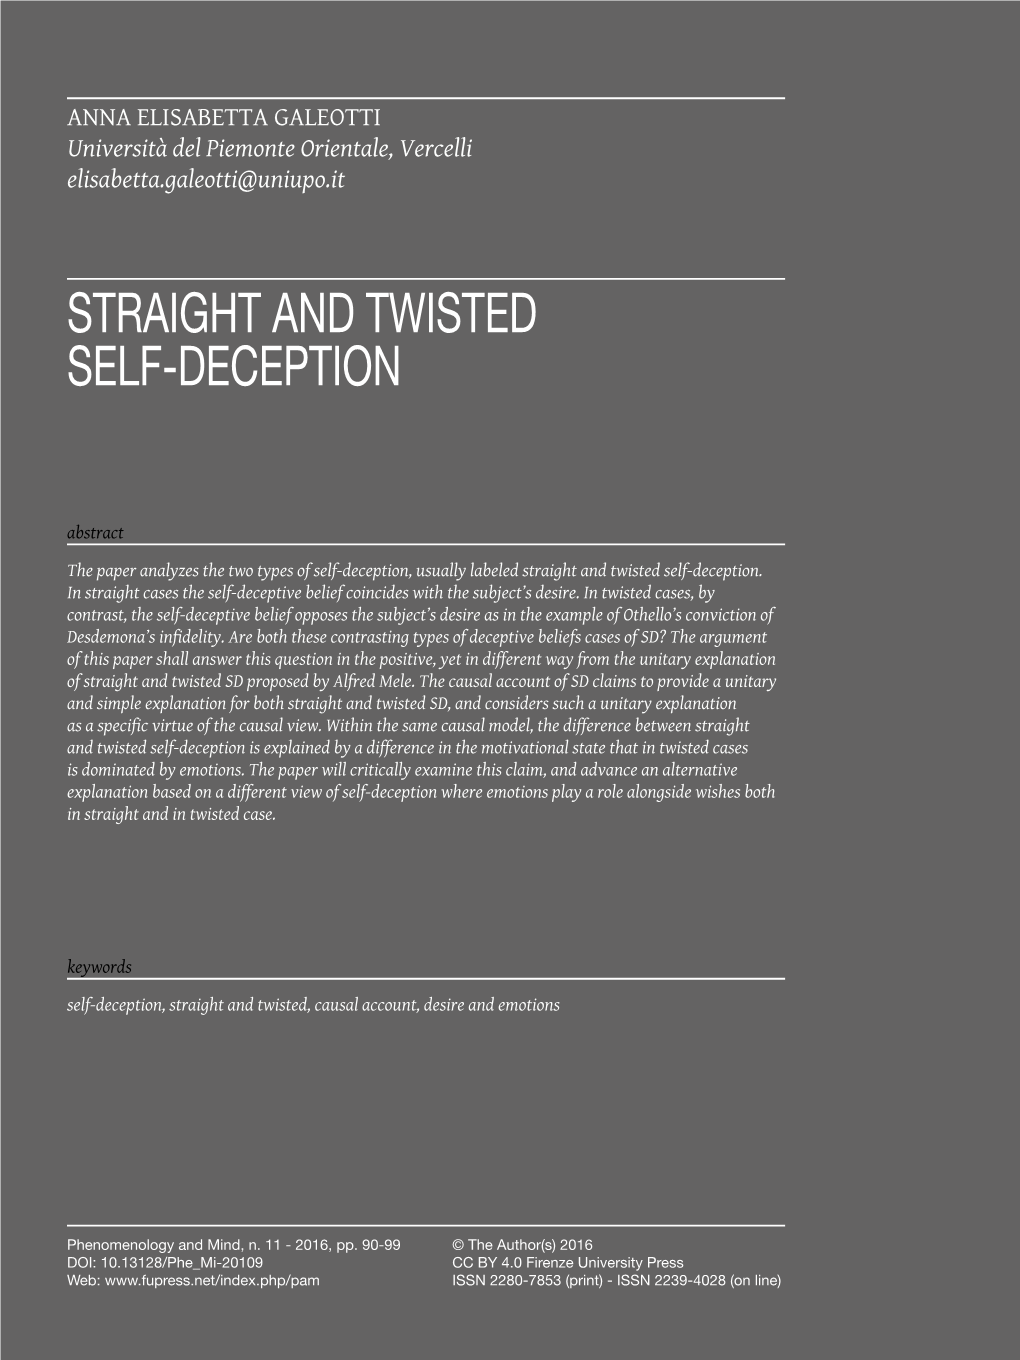 Straight and Twisted Self-Deception